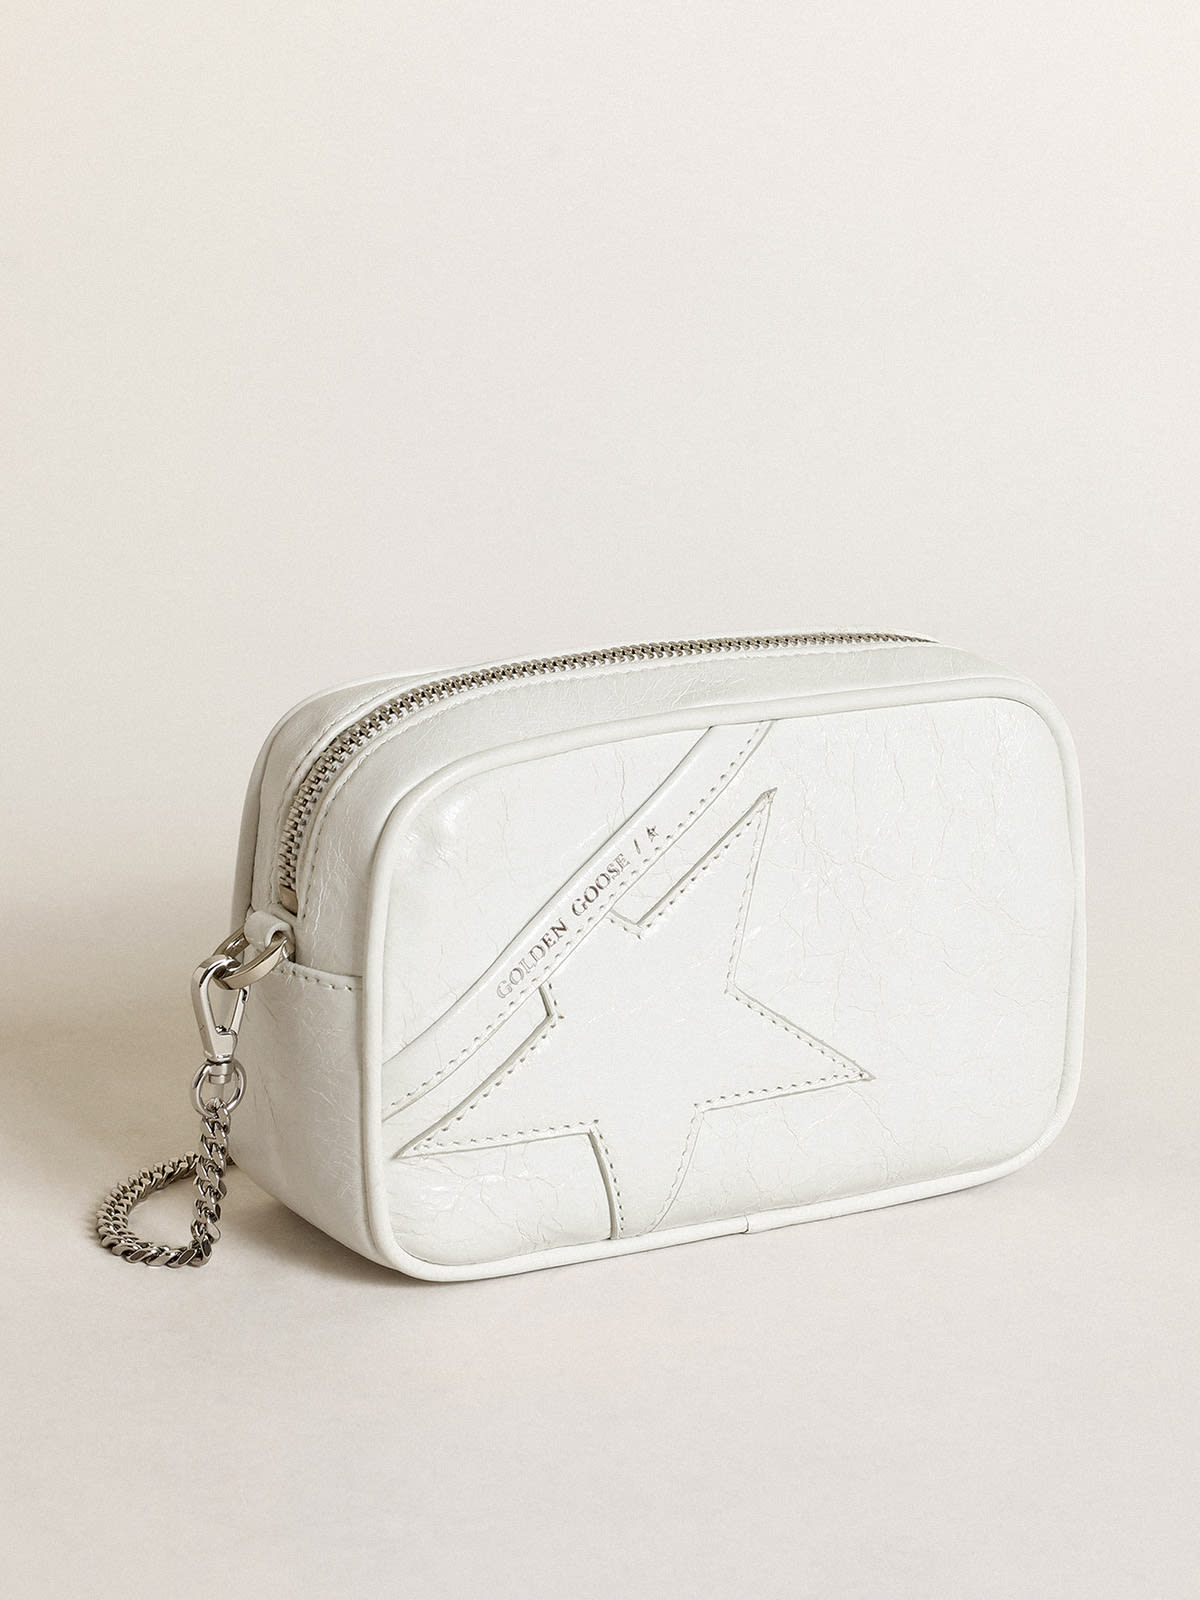 Golden Goose - Women's Mini Star Bag in white glossy leather with tone-on-tone star in 